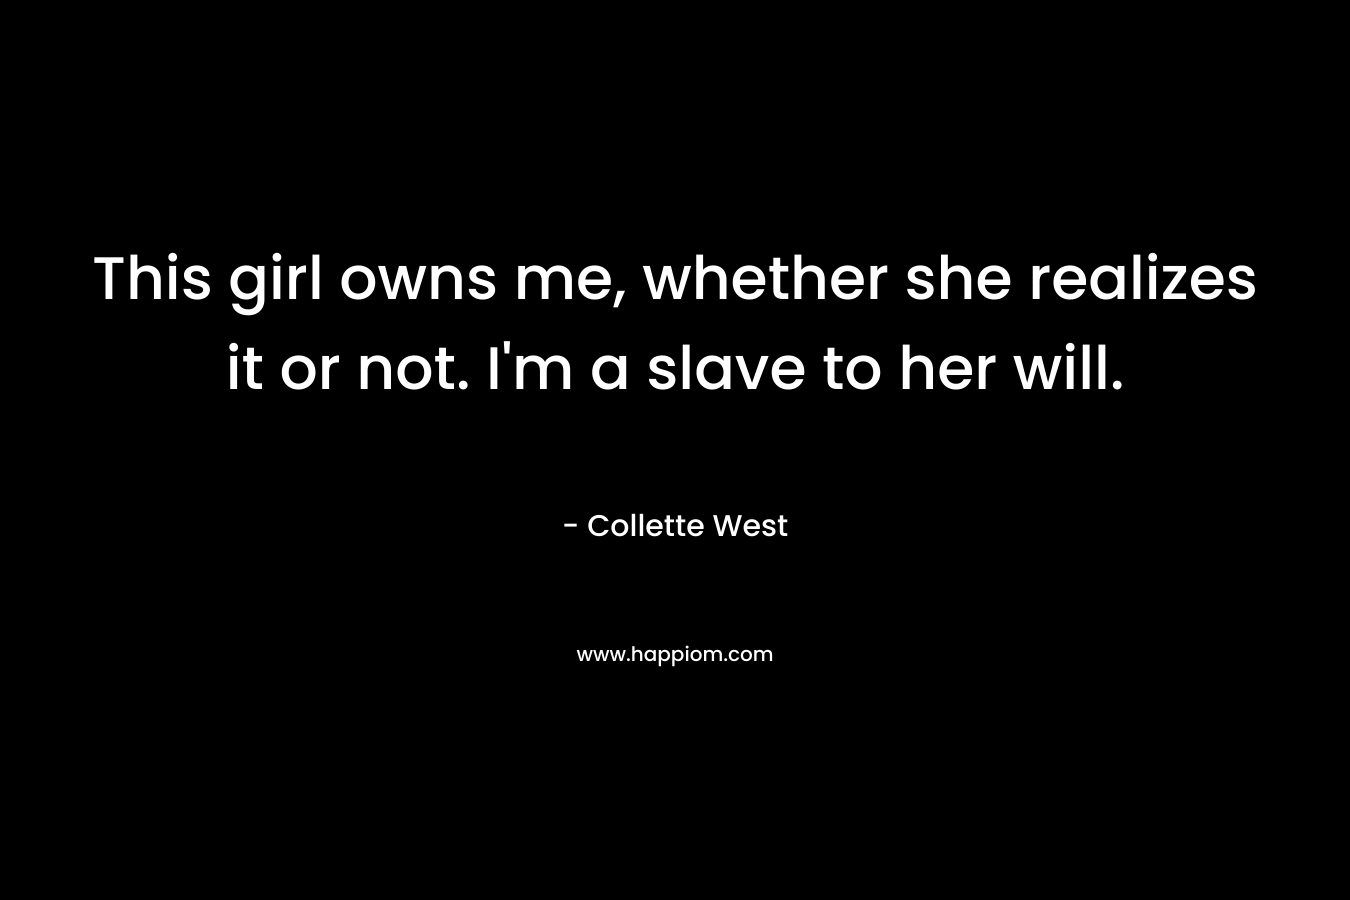 This girl owns me, whether she realizes it or not. I’m a slave to her will. – Collette West